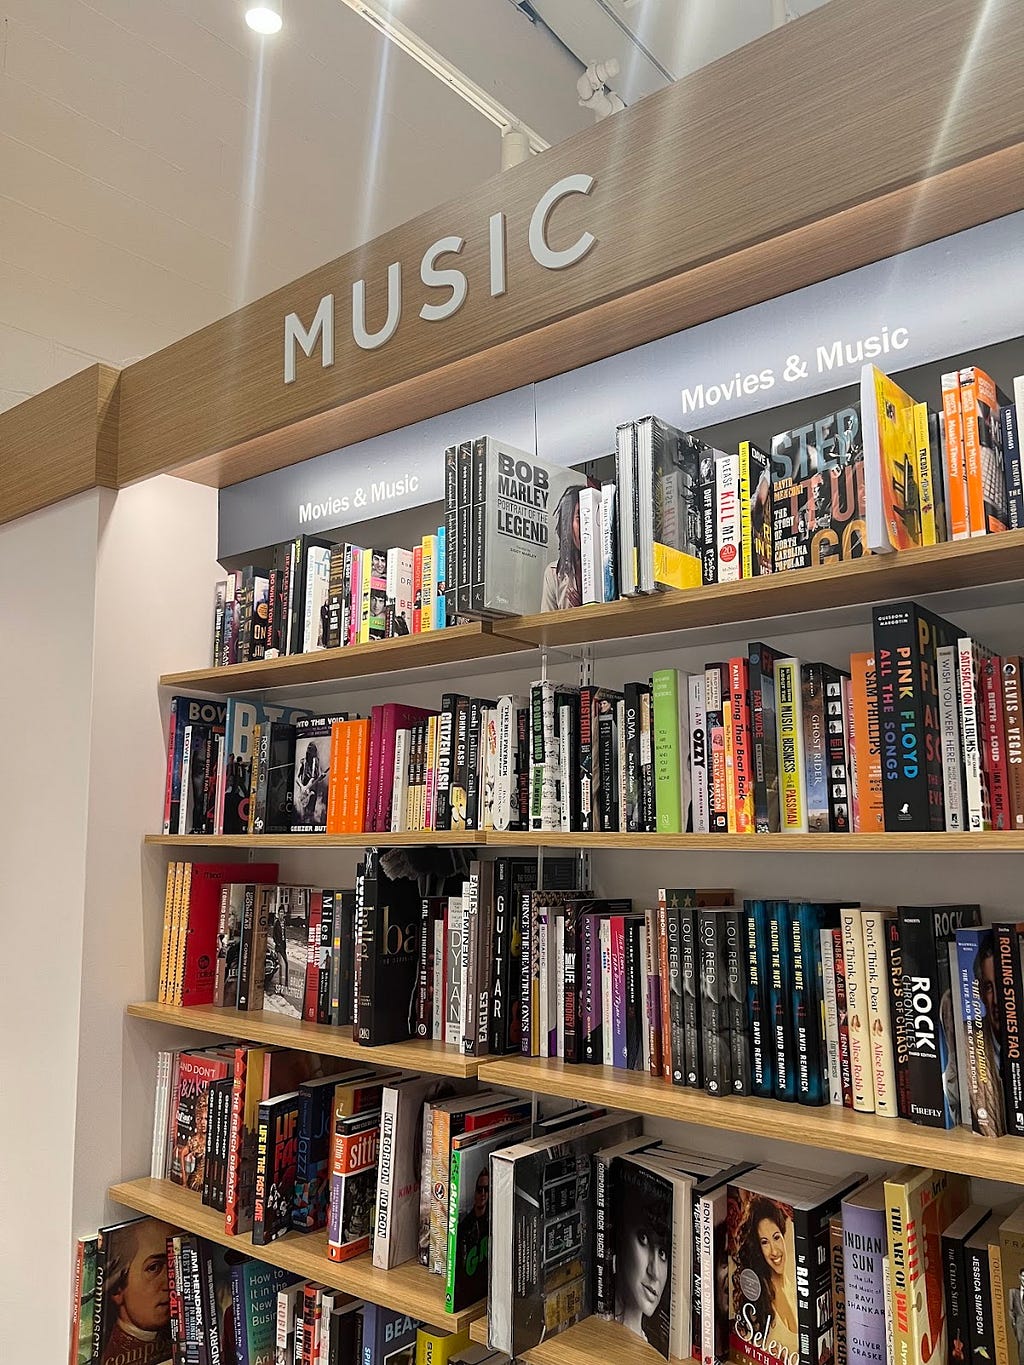 An image of the music book section of Barnes and Noble.